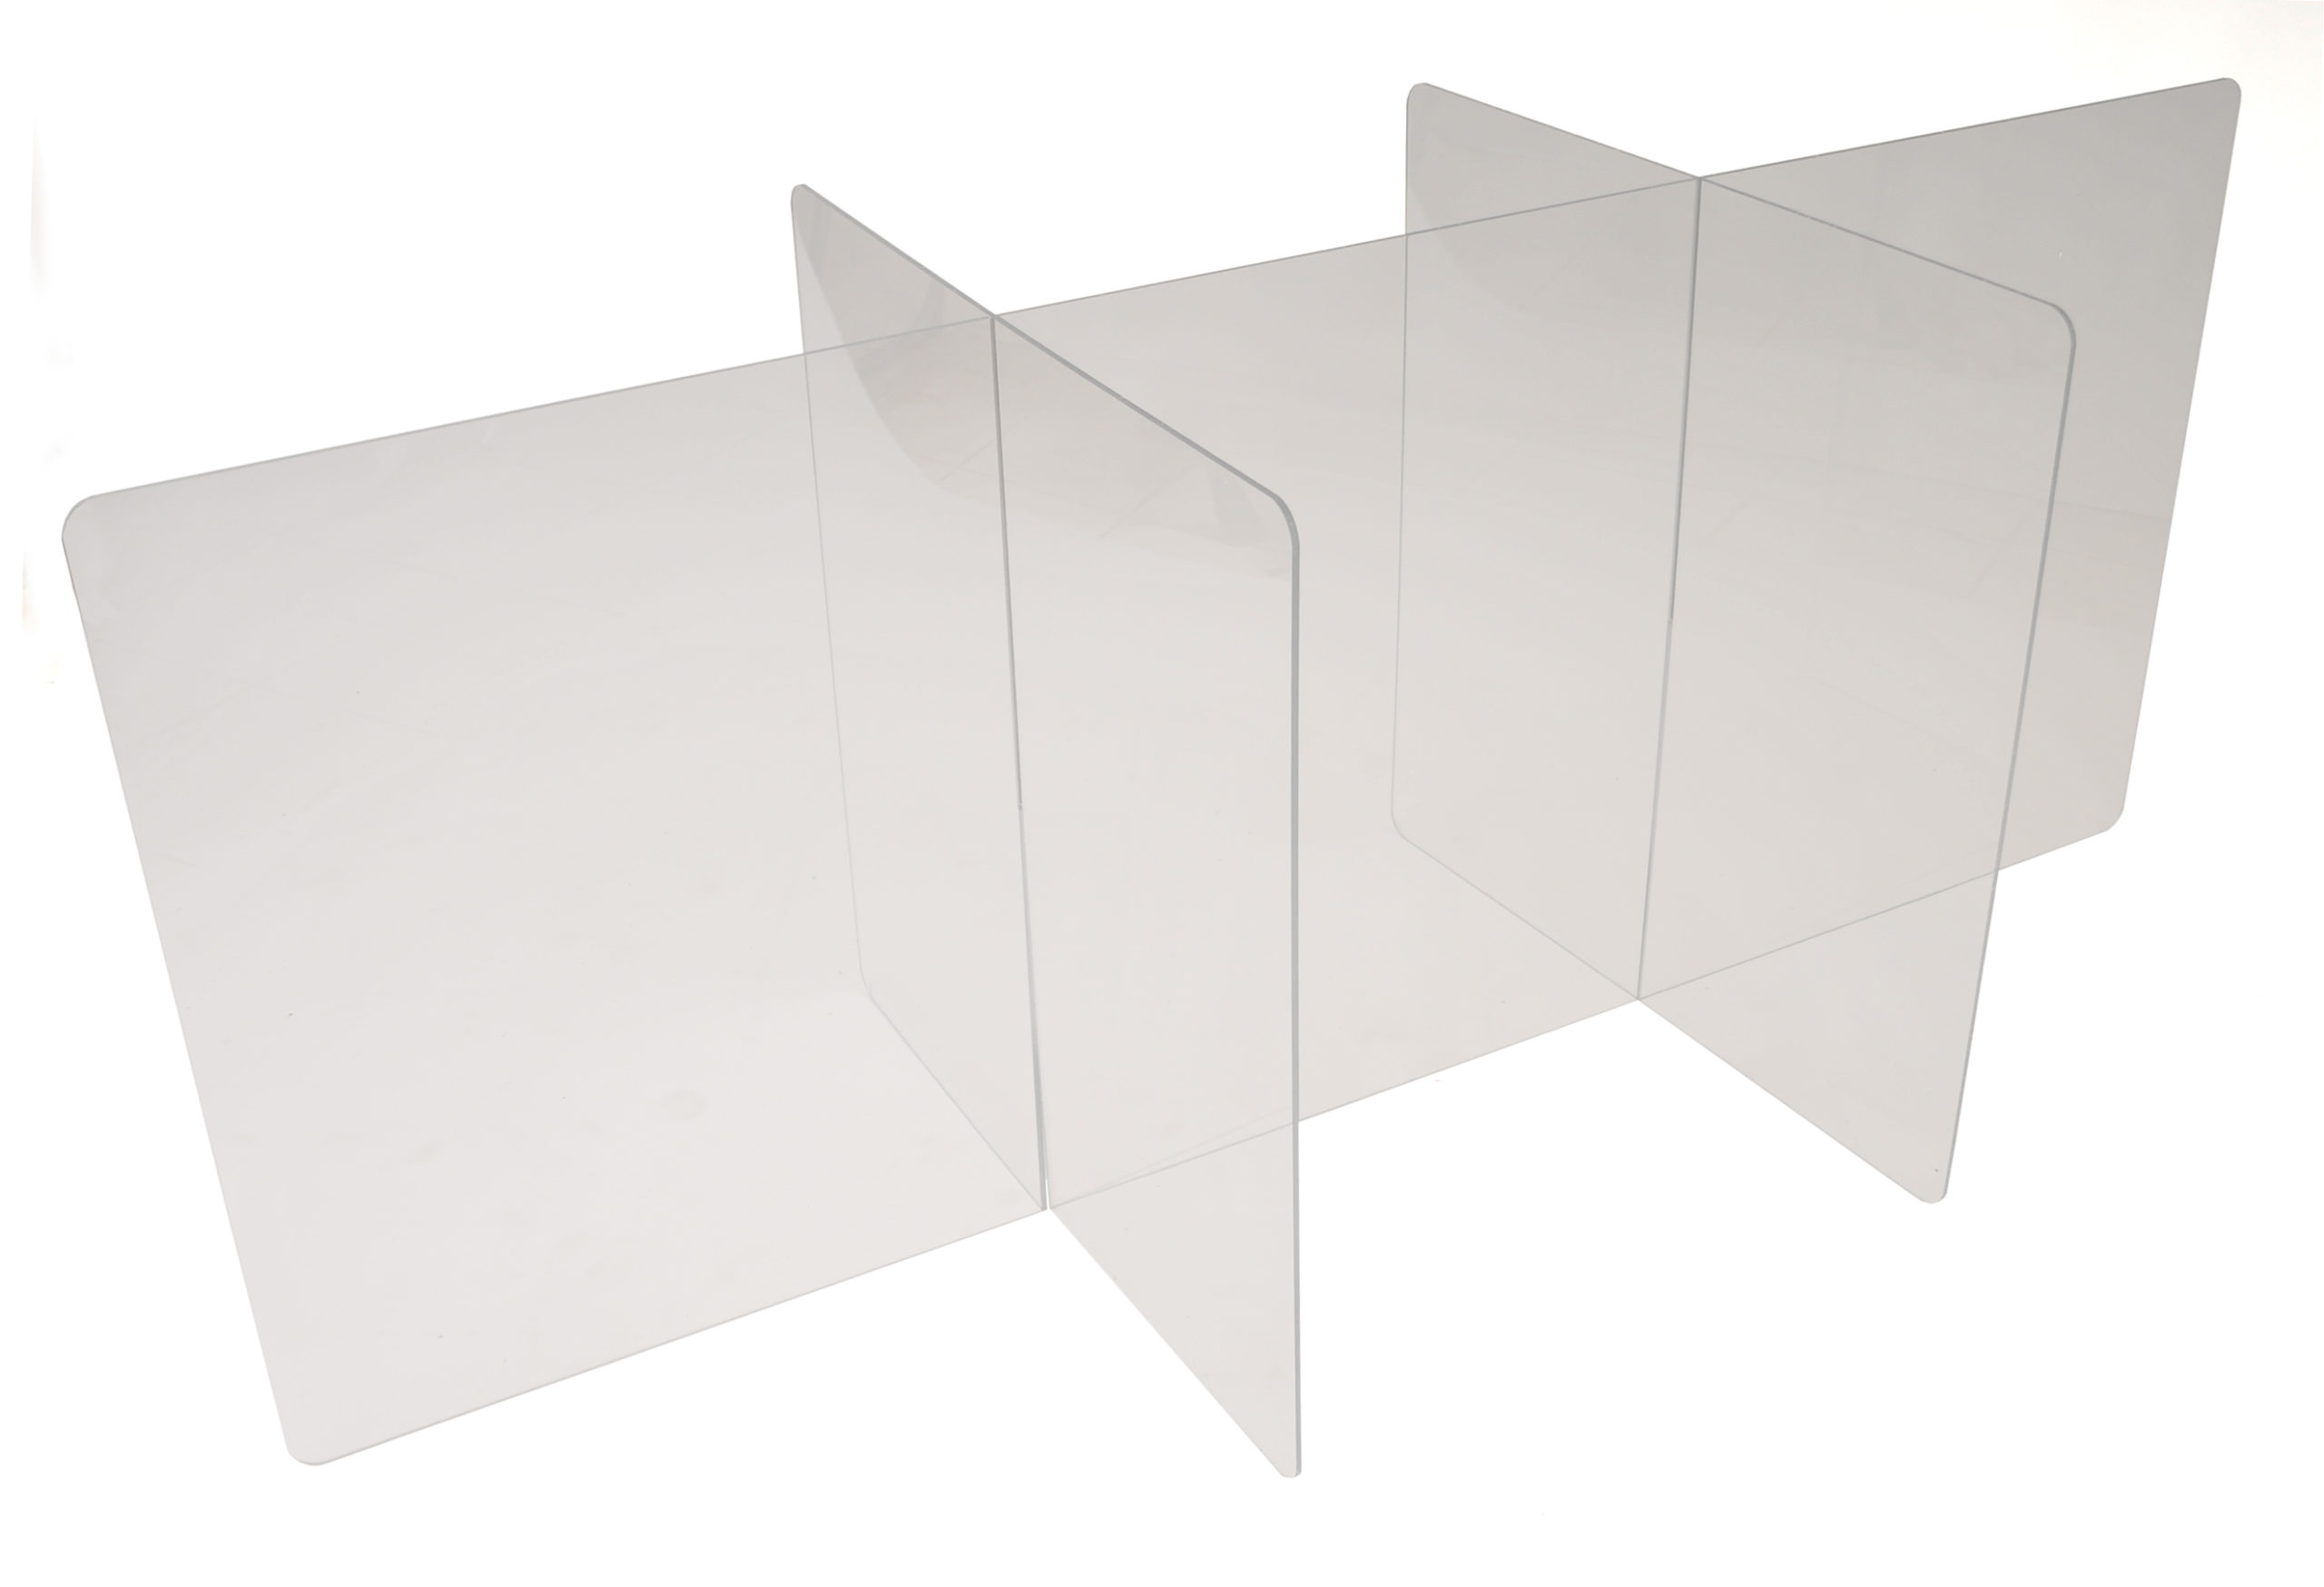 Breath Shield Dividers for Oval or Rectangular Tables